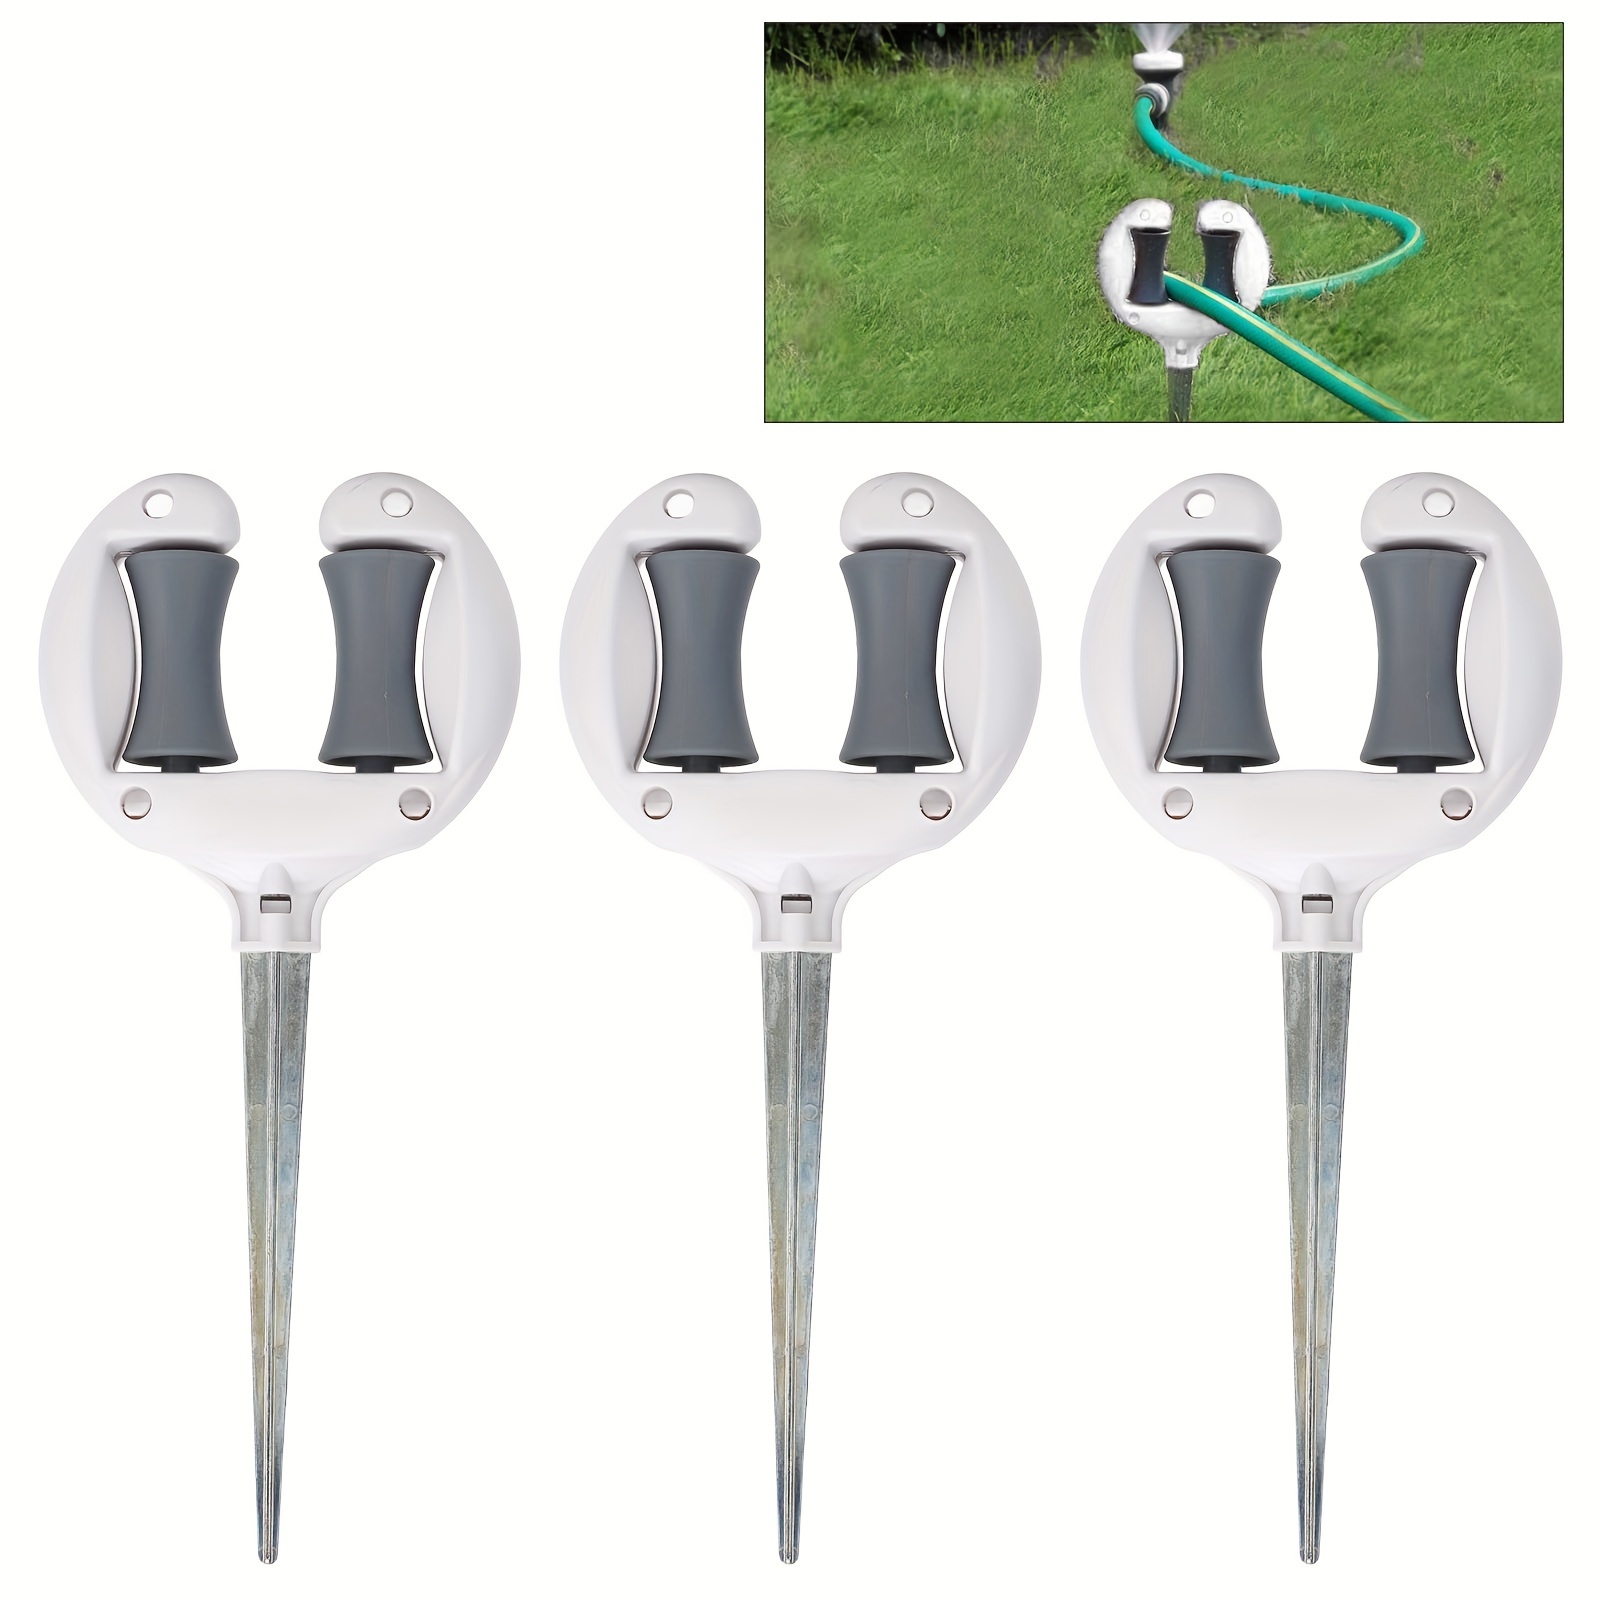 

Durable Iron Garden Hose Guide With Roller - Easy-to-install Lawn Hose Stake For Secure Water Tube Positioning And Plant Protection